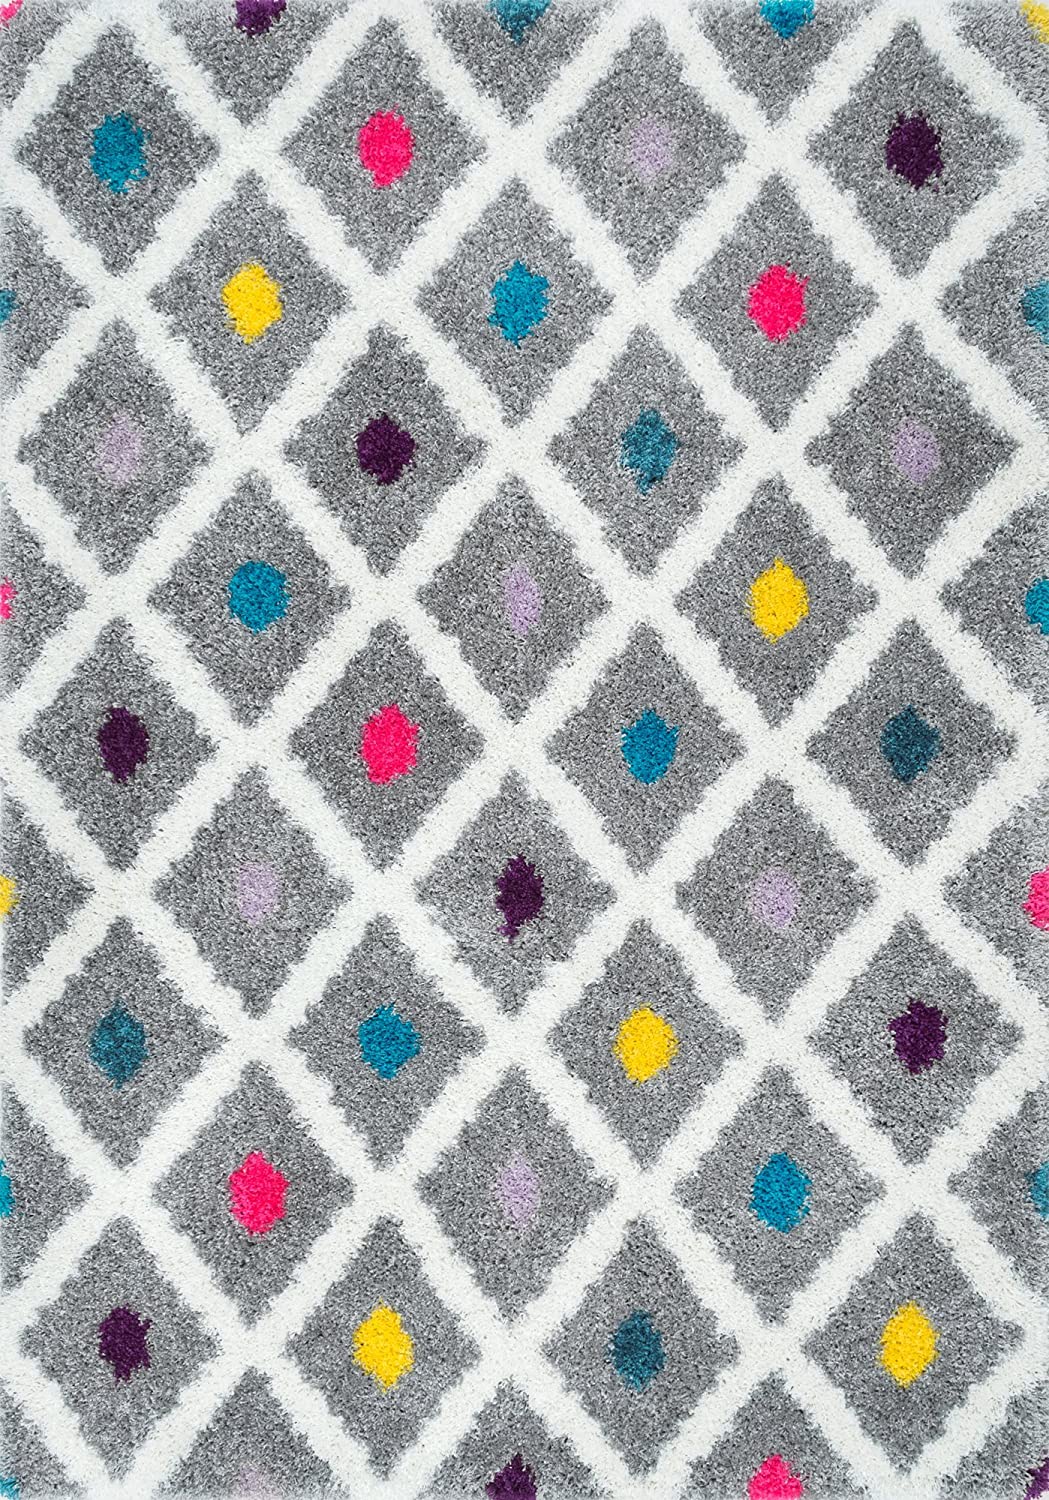 Grey rug with diagonal white lines and colorful dots.